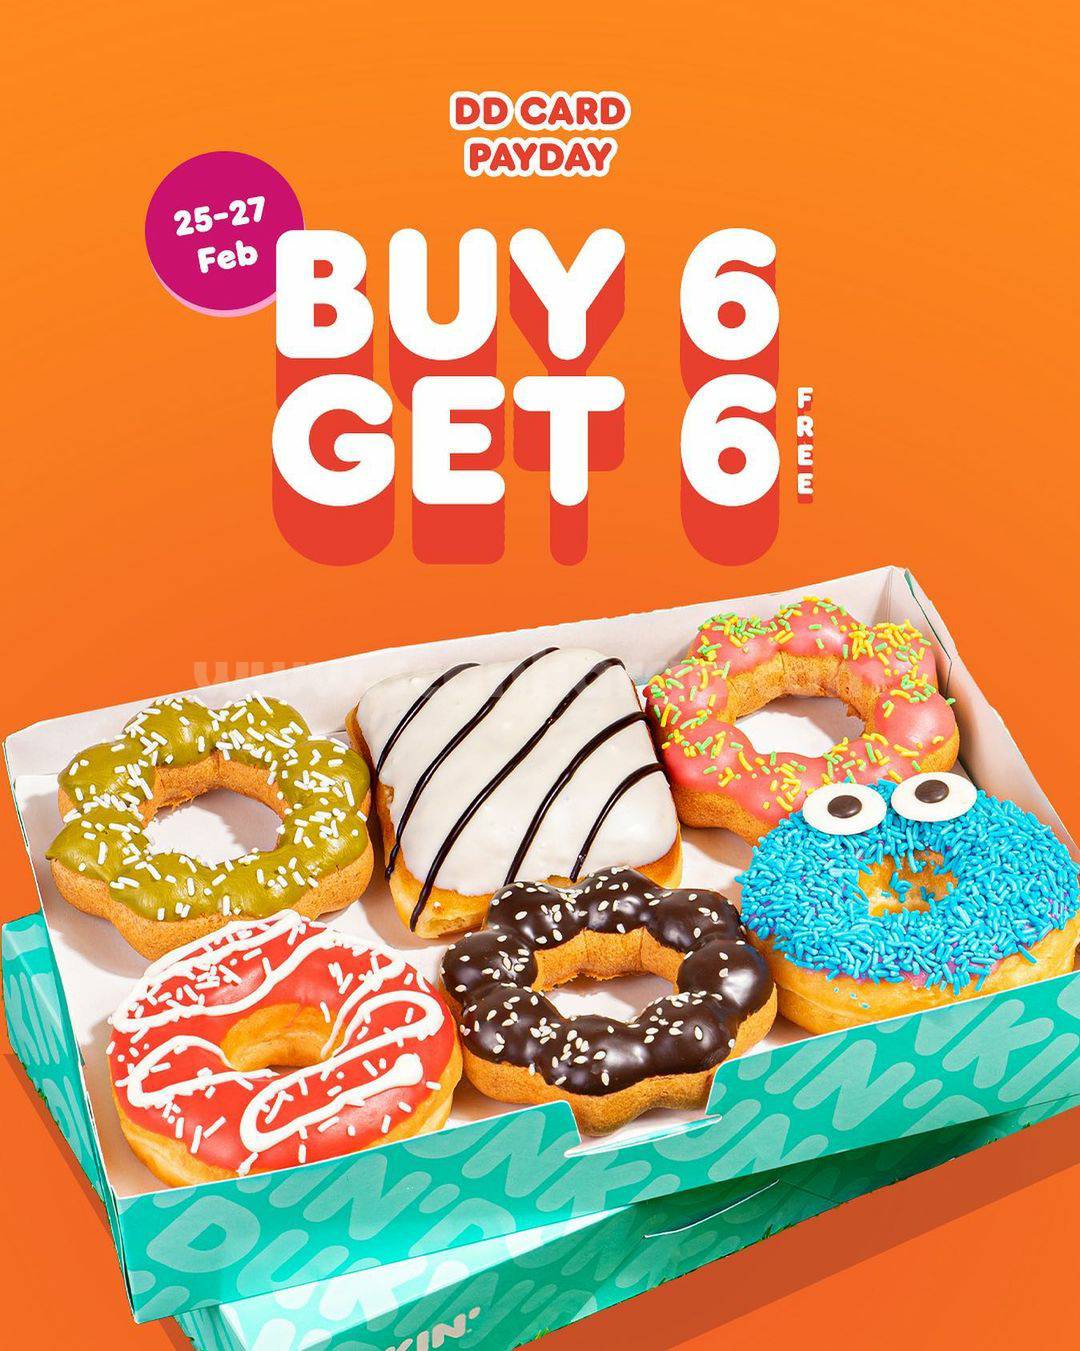 DUNKIN DONUTS Promo PAYDAY DD Card - BUY 6 GET 6